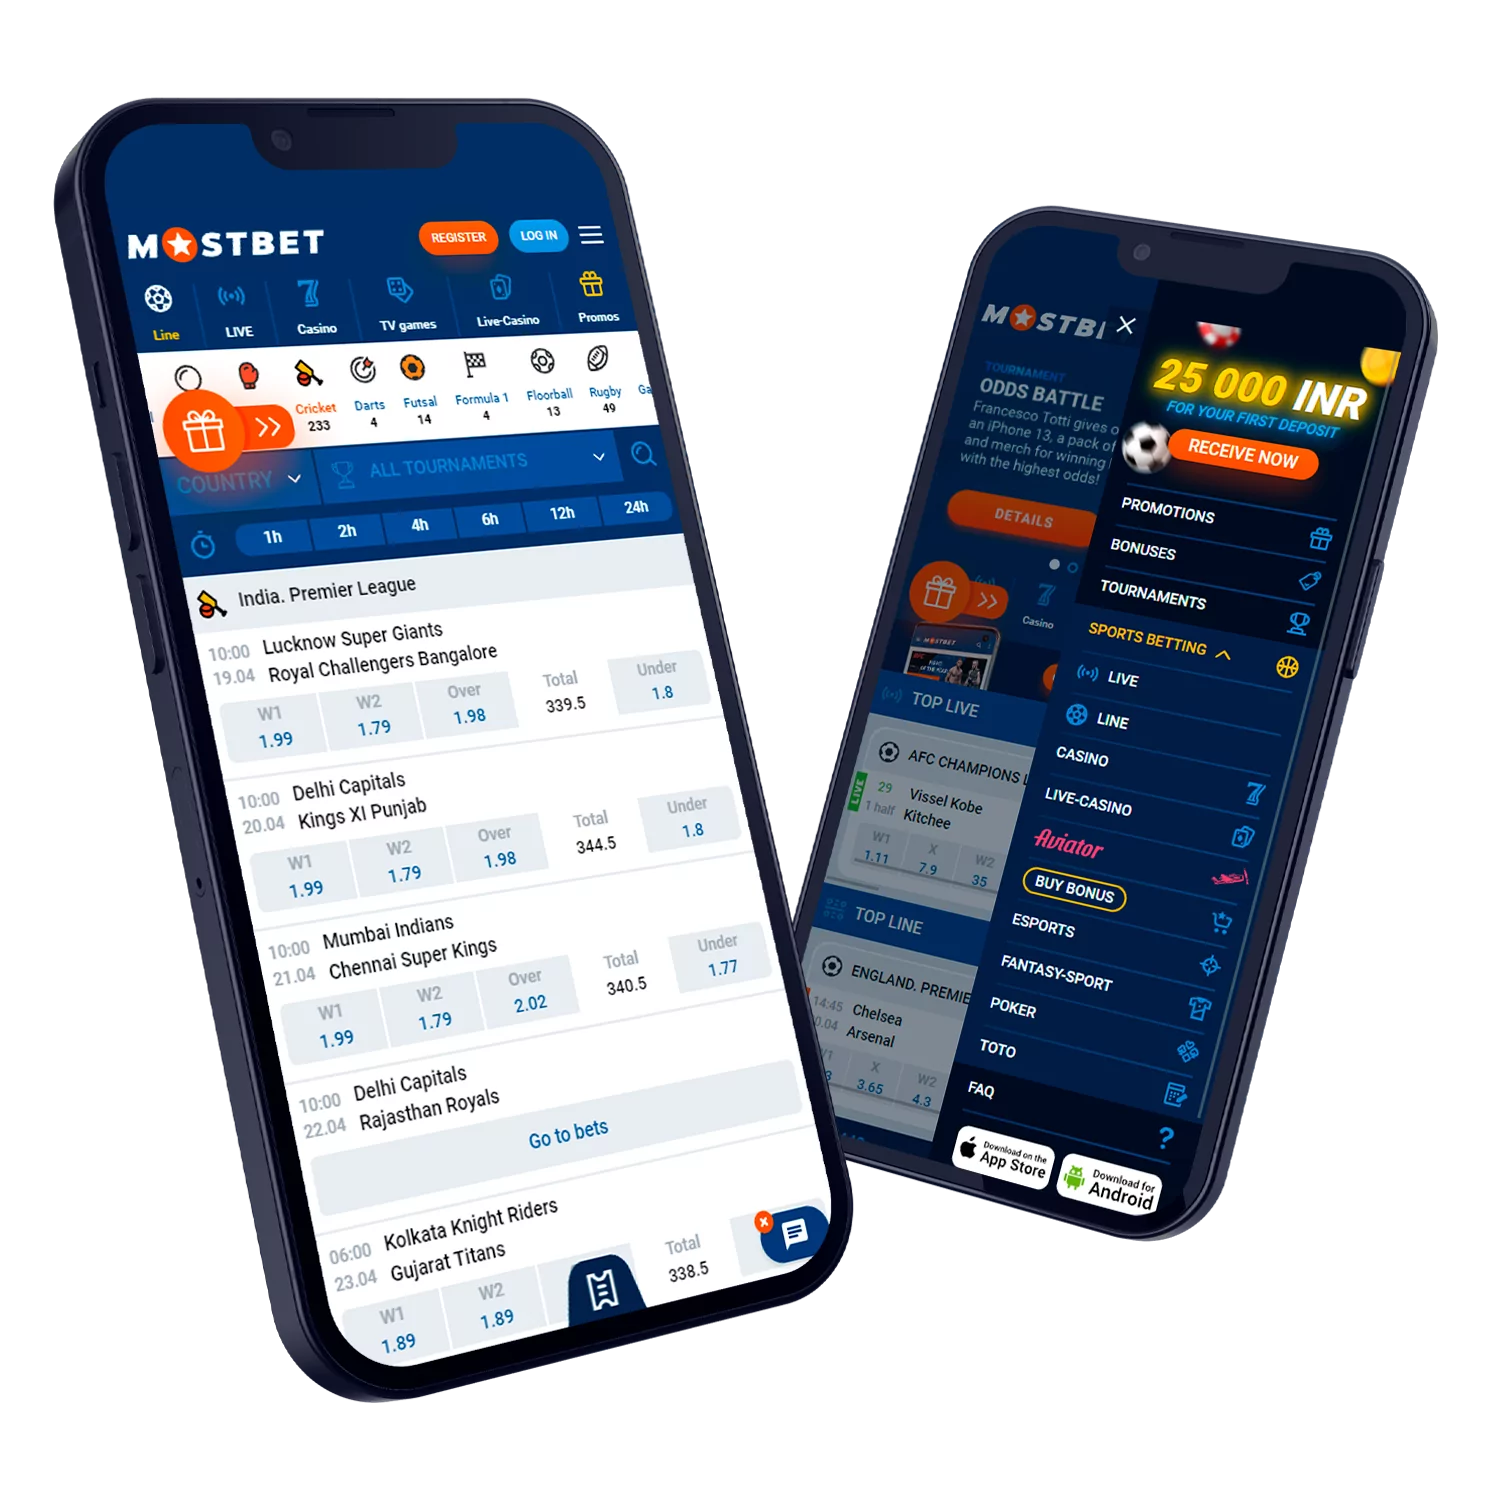 The official Mostbet app is available for free for Android and iOS.